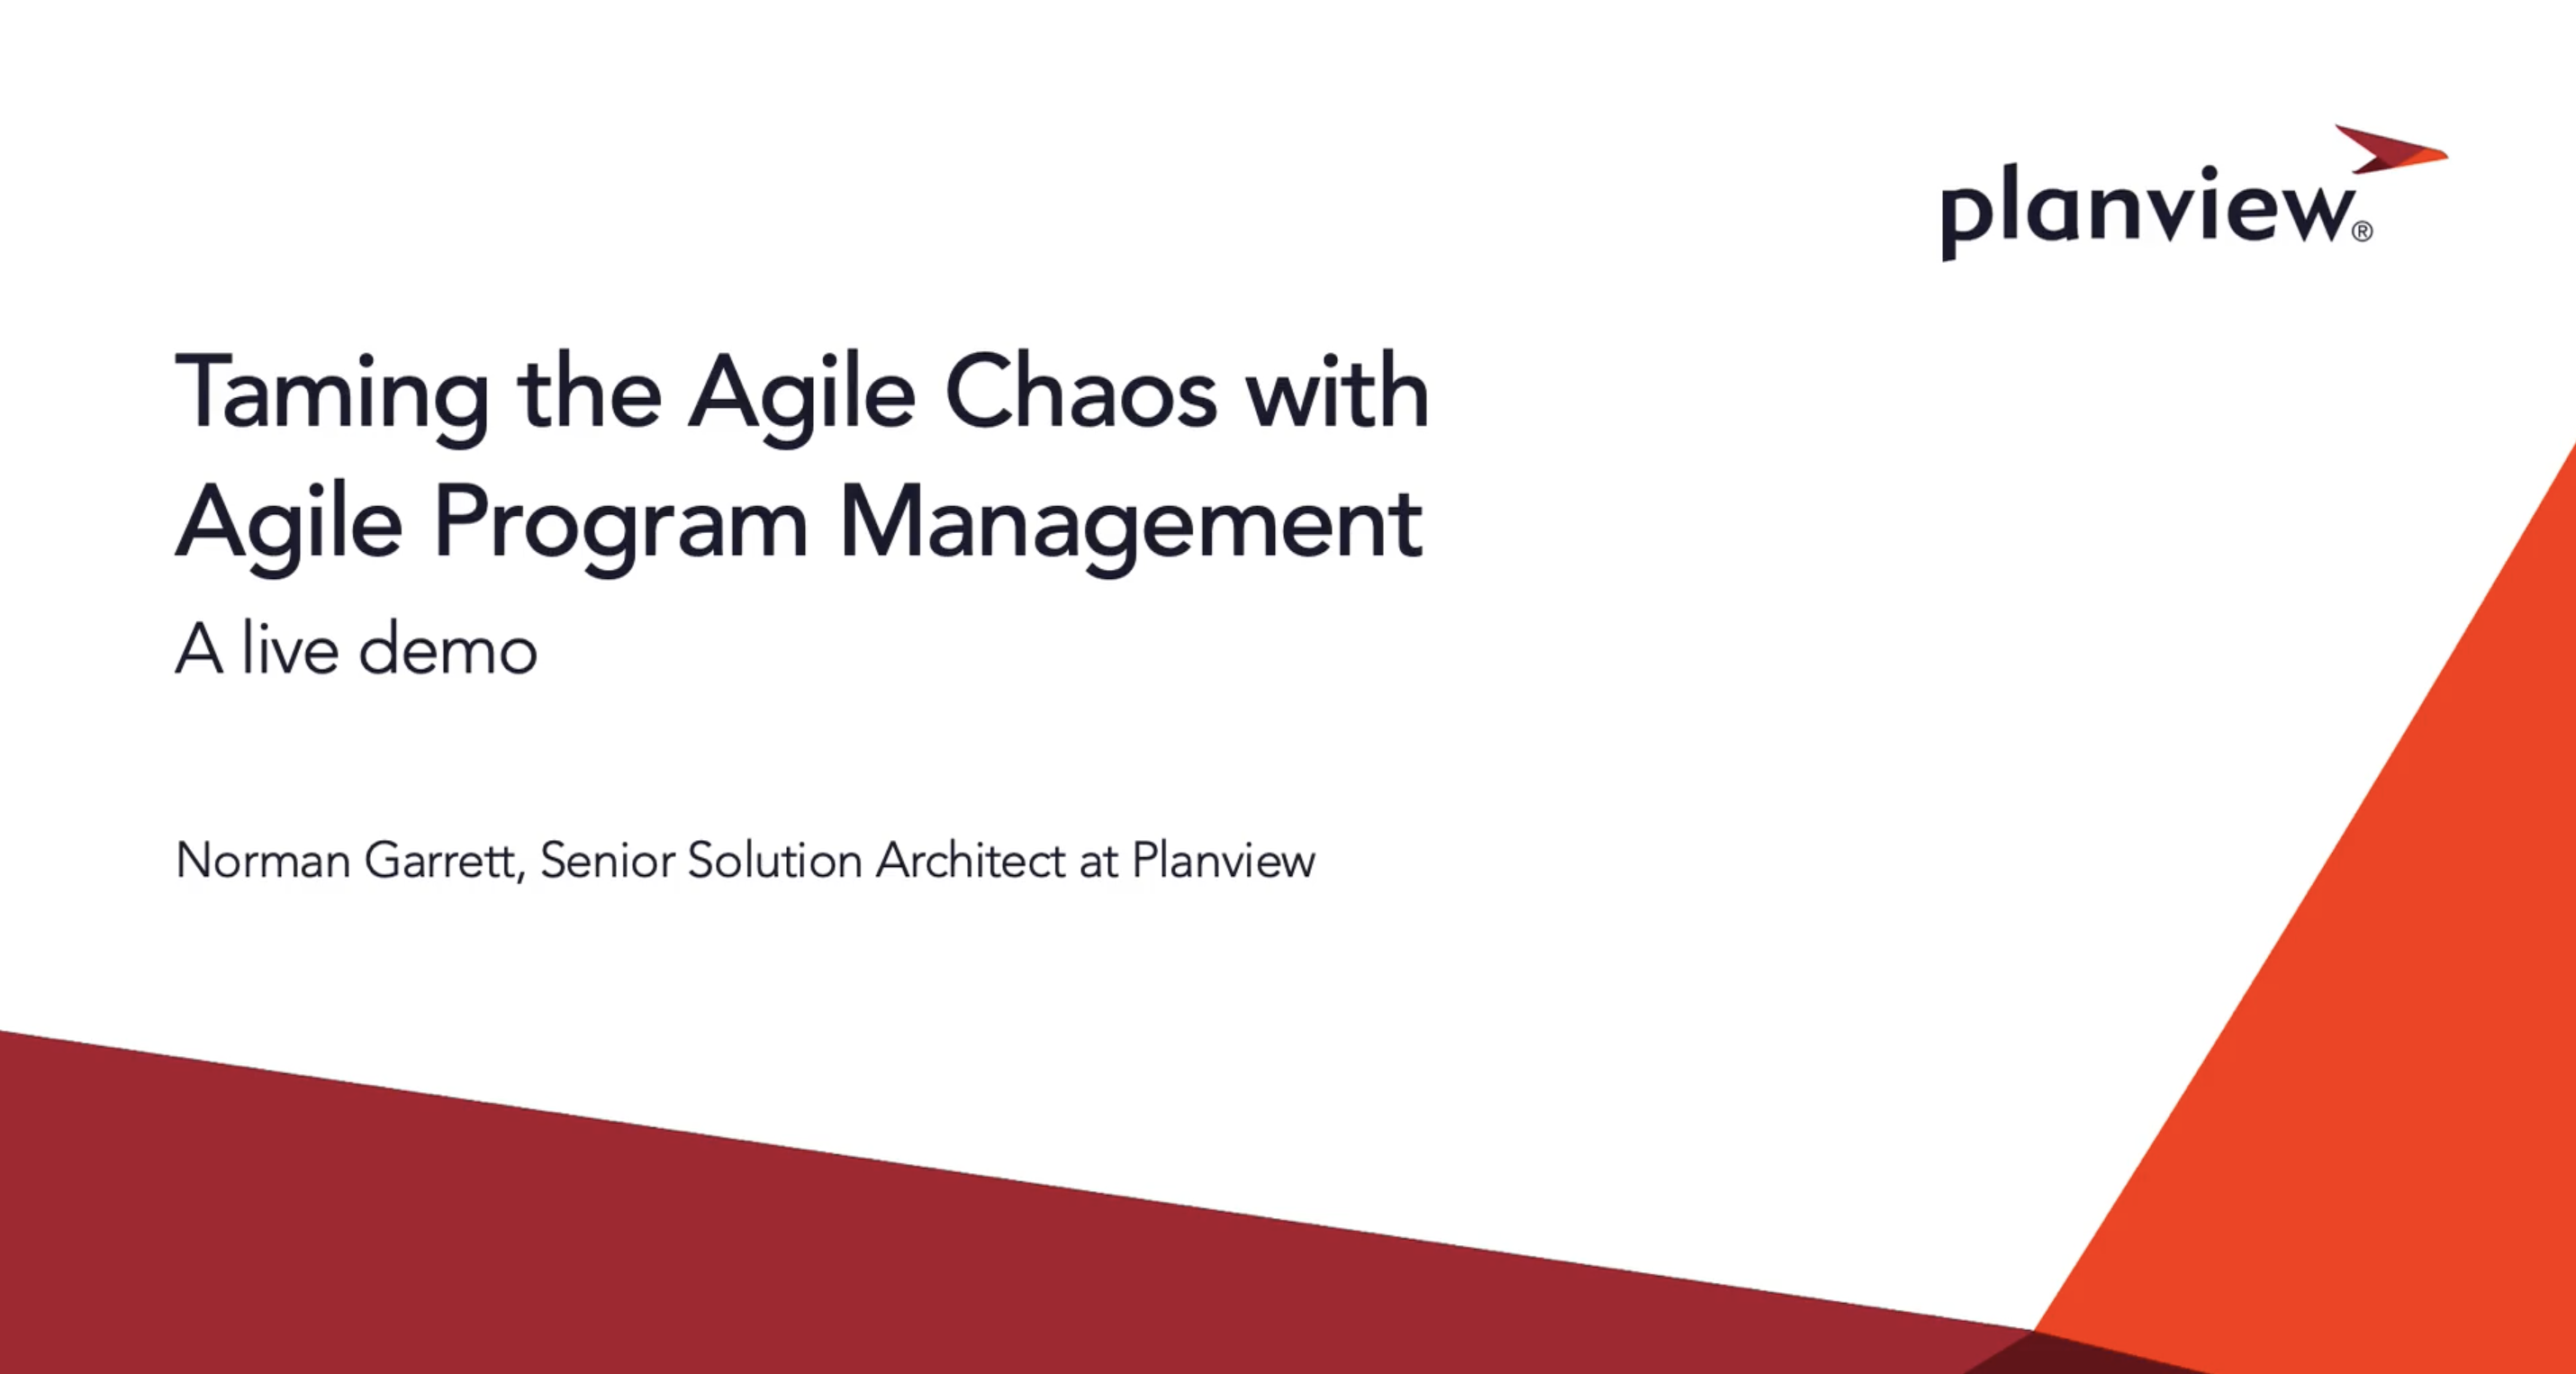 Taming the Agile Chaos with Agile Program Management